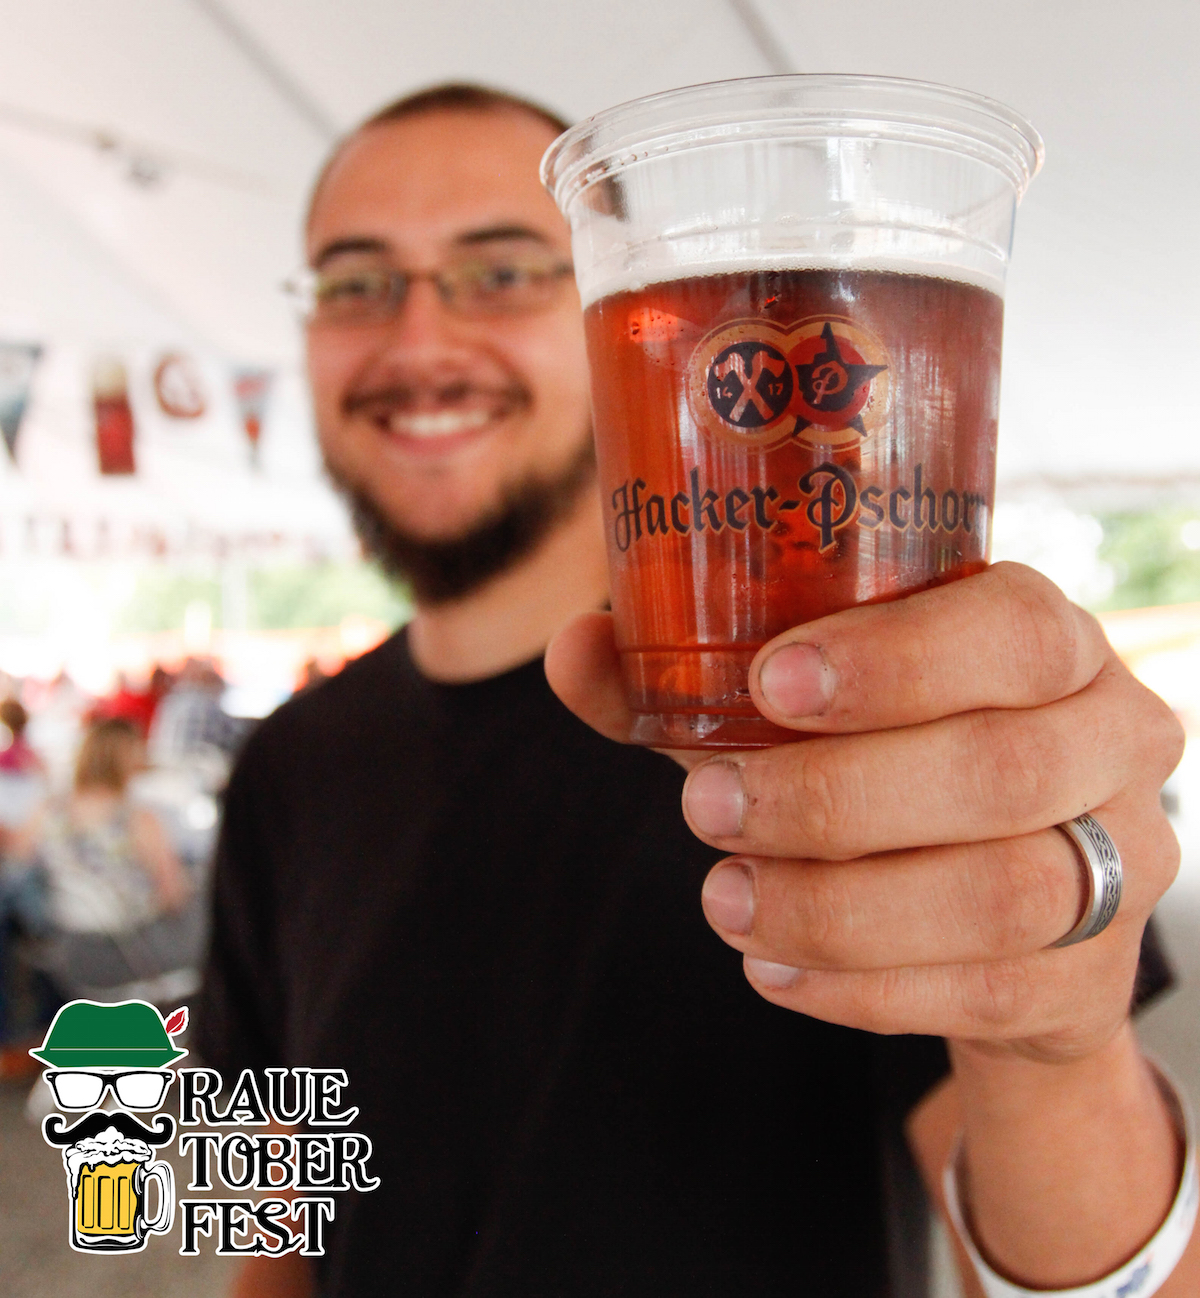 RAUE CENTER TO CONTINUE ANNUAL RAUETOBERFEST AT NEW LOCATION ON SEPTEMBER 12, 2015 1 Raue Center For The Arts is proud to announce they will be hosting their second annual Rauetoberfest, a nod to the traditional Oktoberfest celebration, on September 12 from 4p until 12a at #11129 Illinois Rt 176 Woodstock, IL 60014.